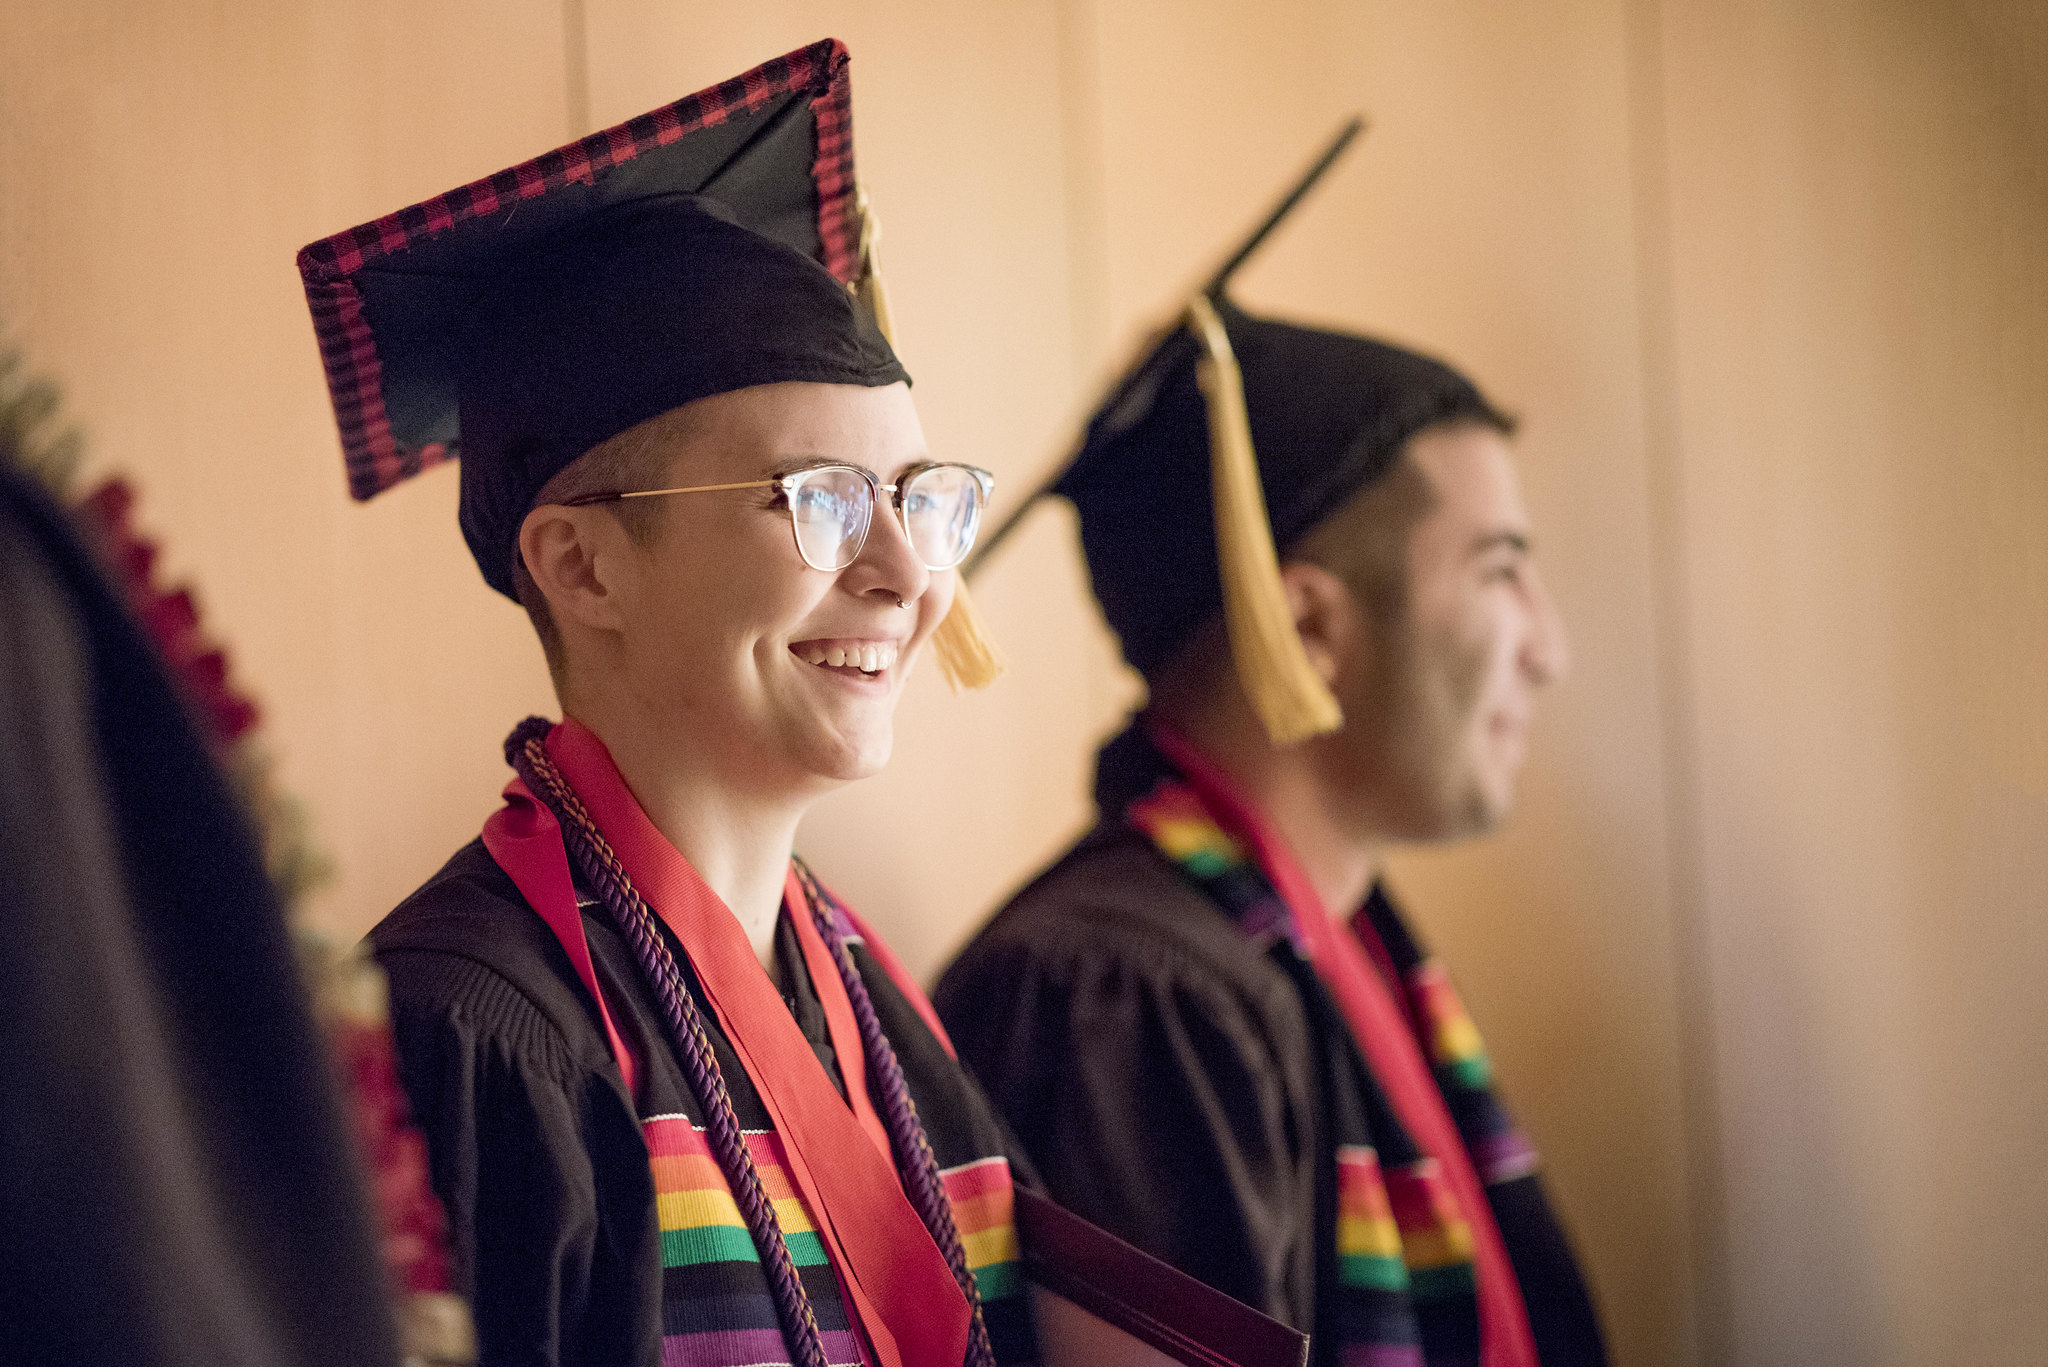 Students smile while wearing mortar boards